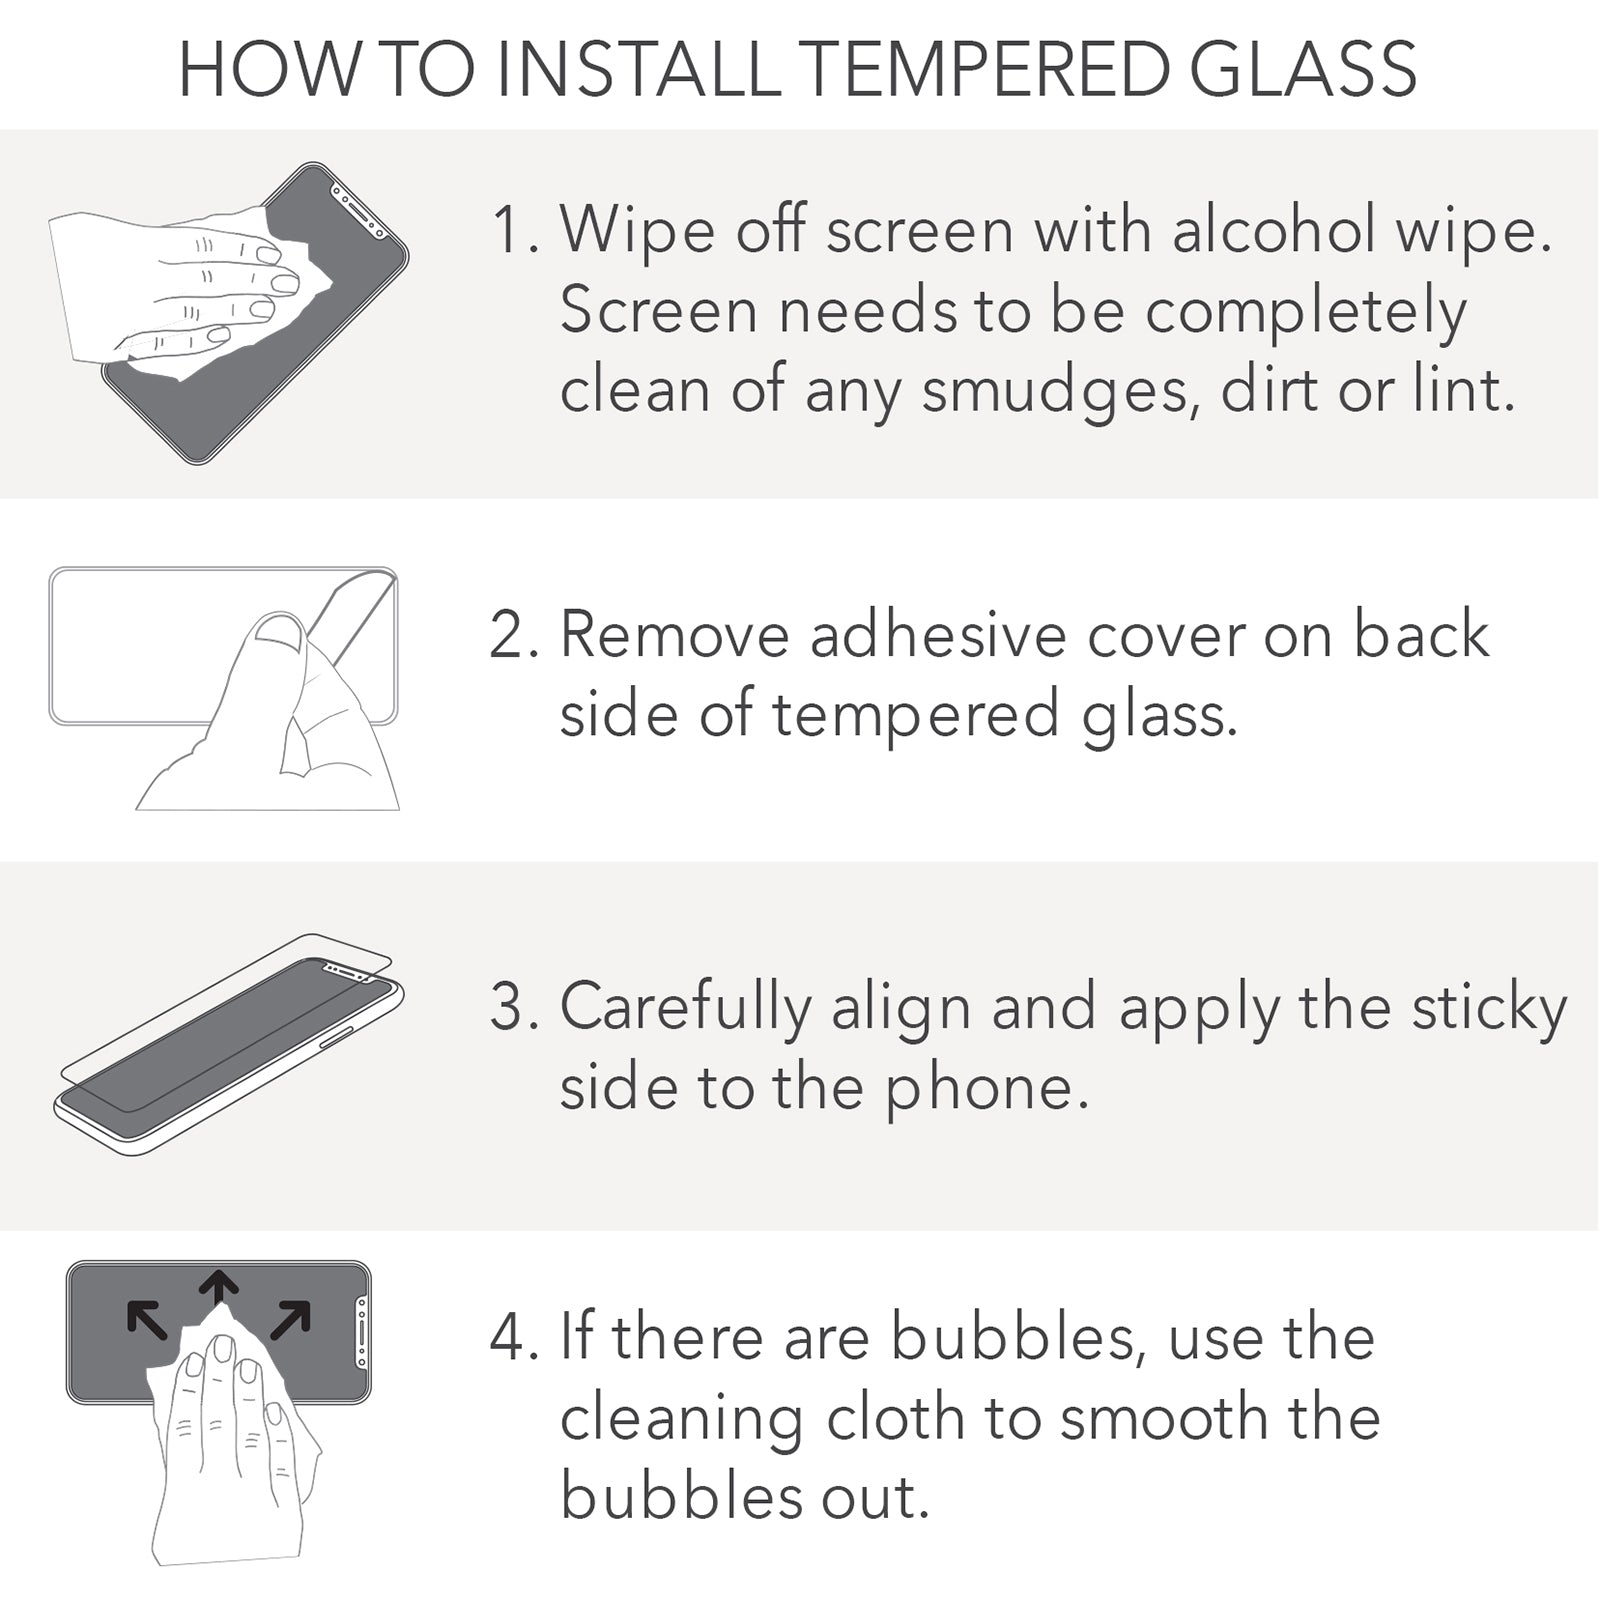 Cellairis Tempered Glass - Shell Shock Apple iPhone 12 Pro/ 12 Super Anti Impact Screen Protectors